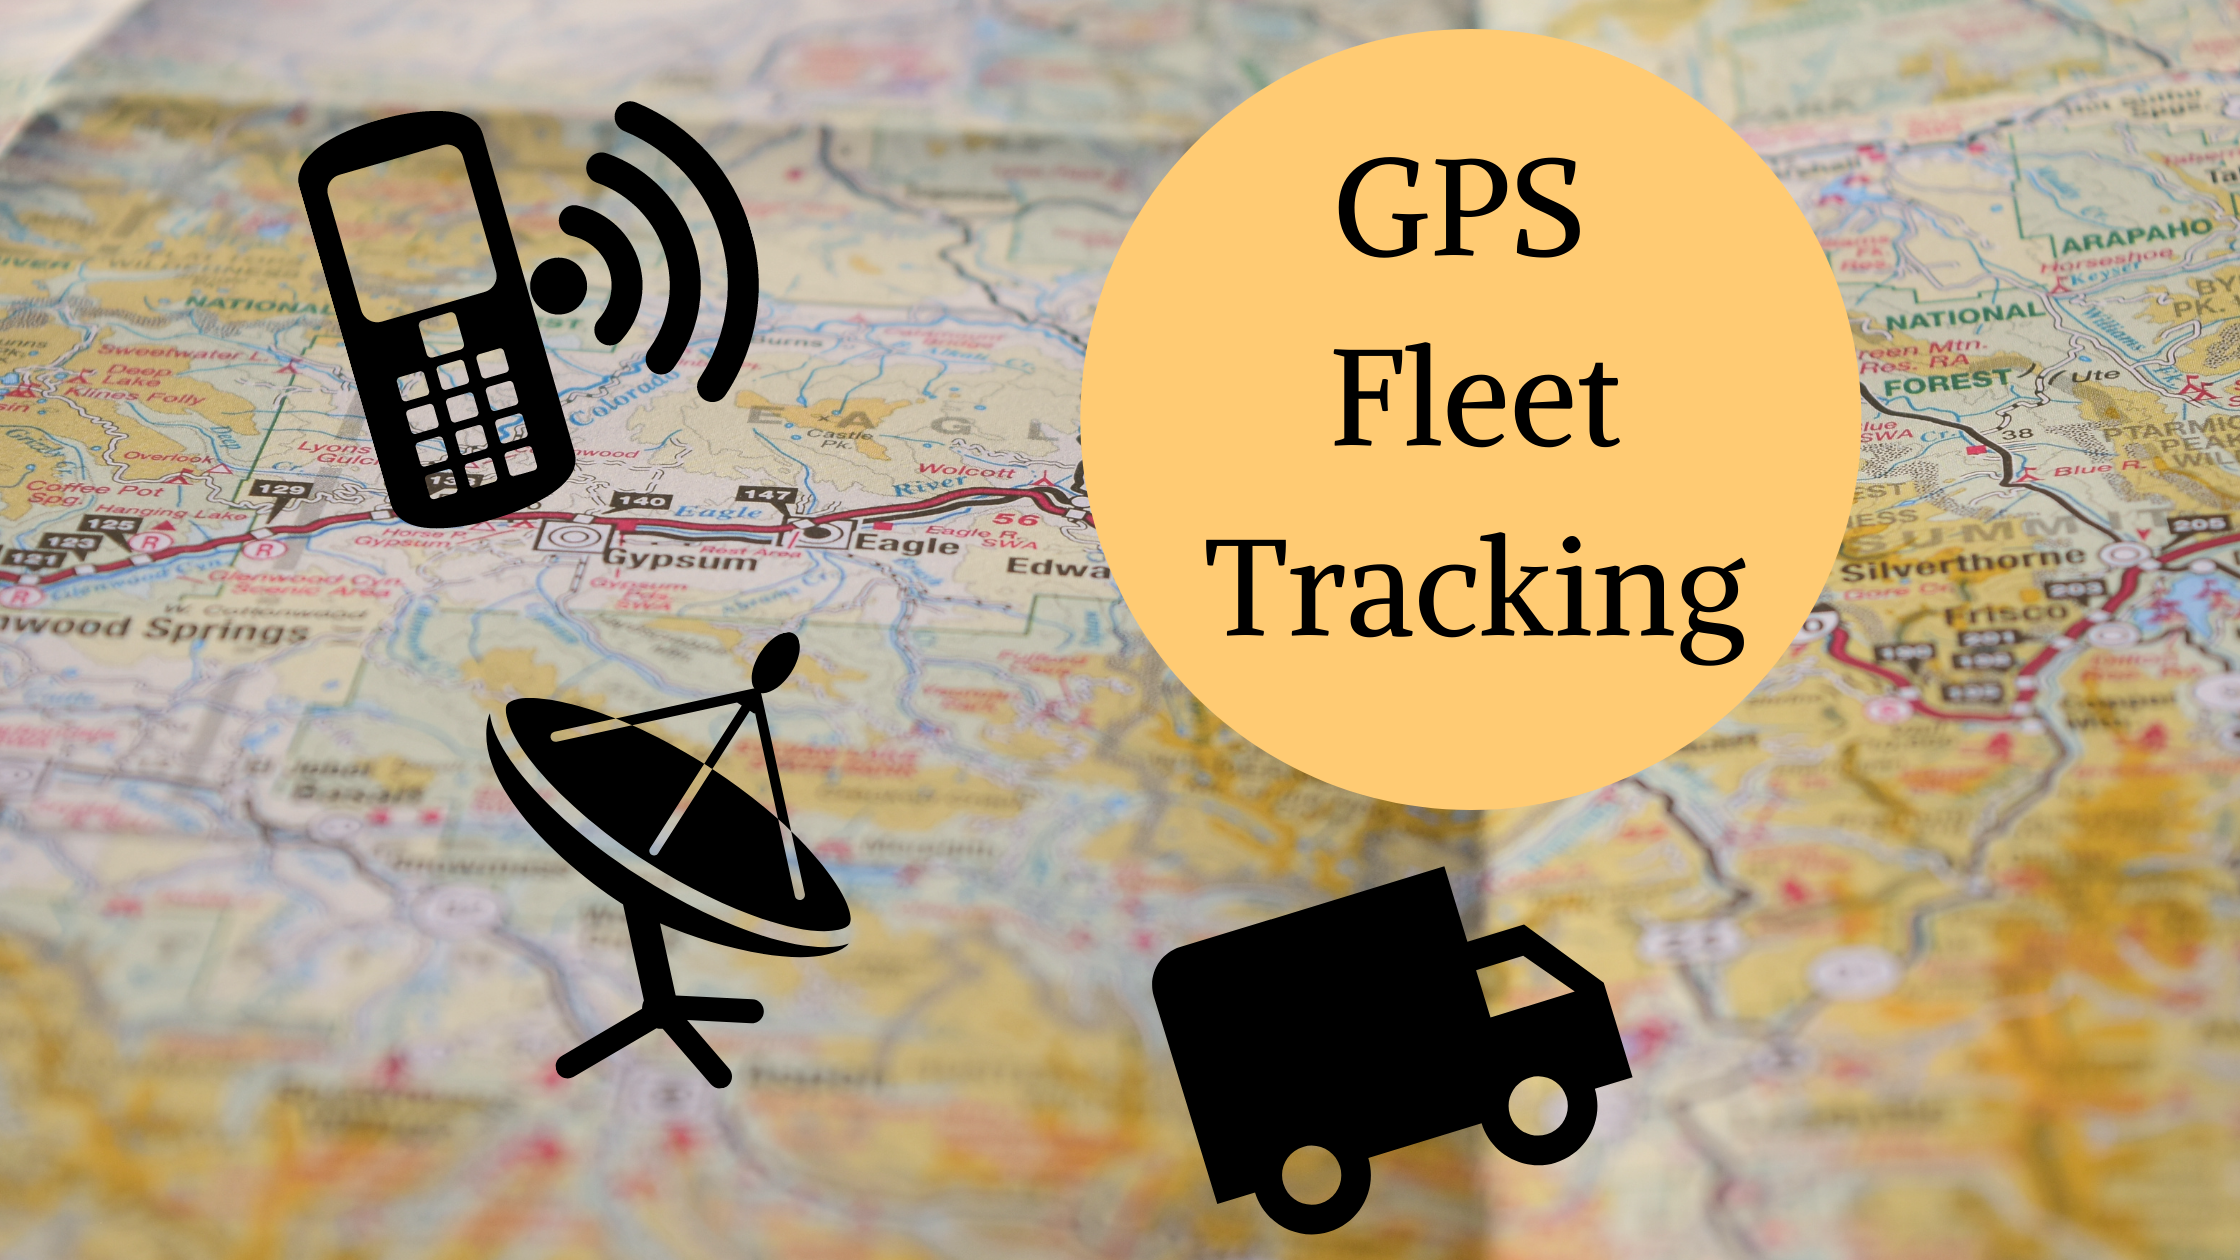 An image of a map with the text: GPS Fleet Tracking along with an illustration of a cellphone, a satellite, and a truck.